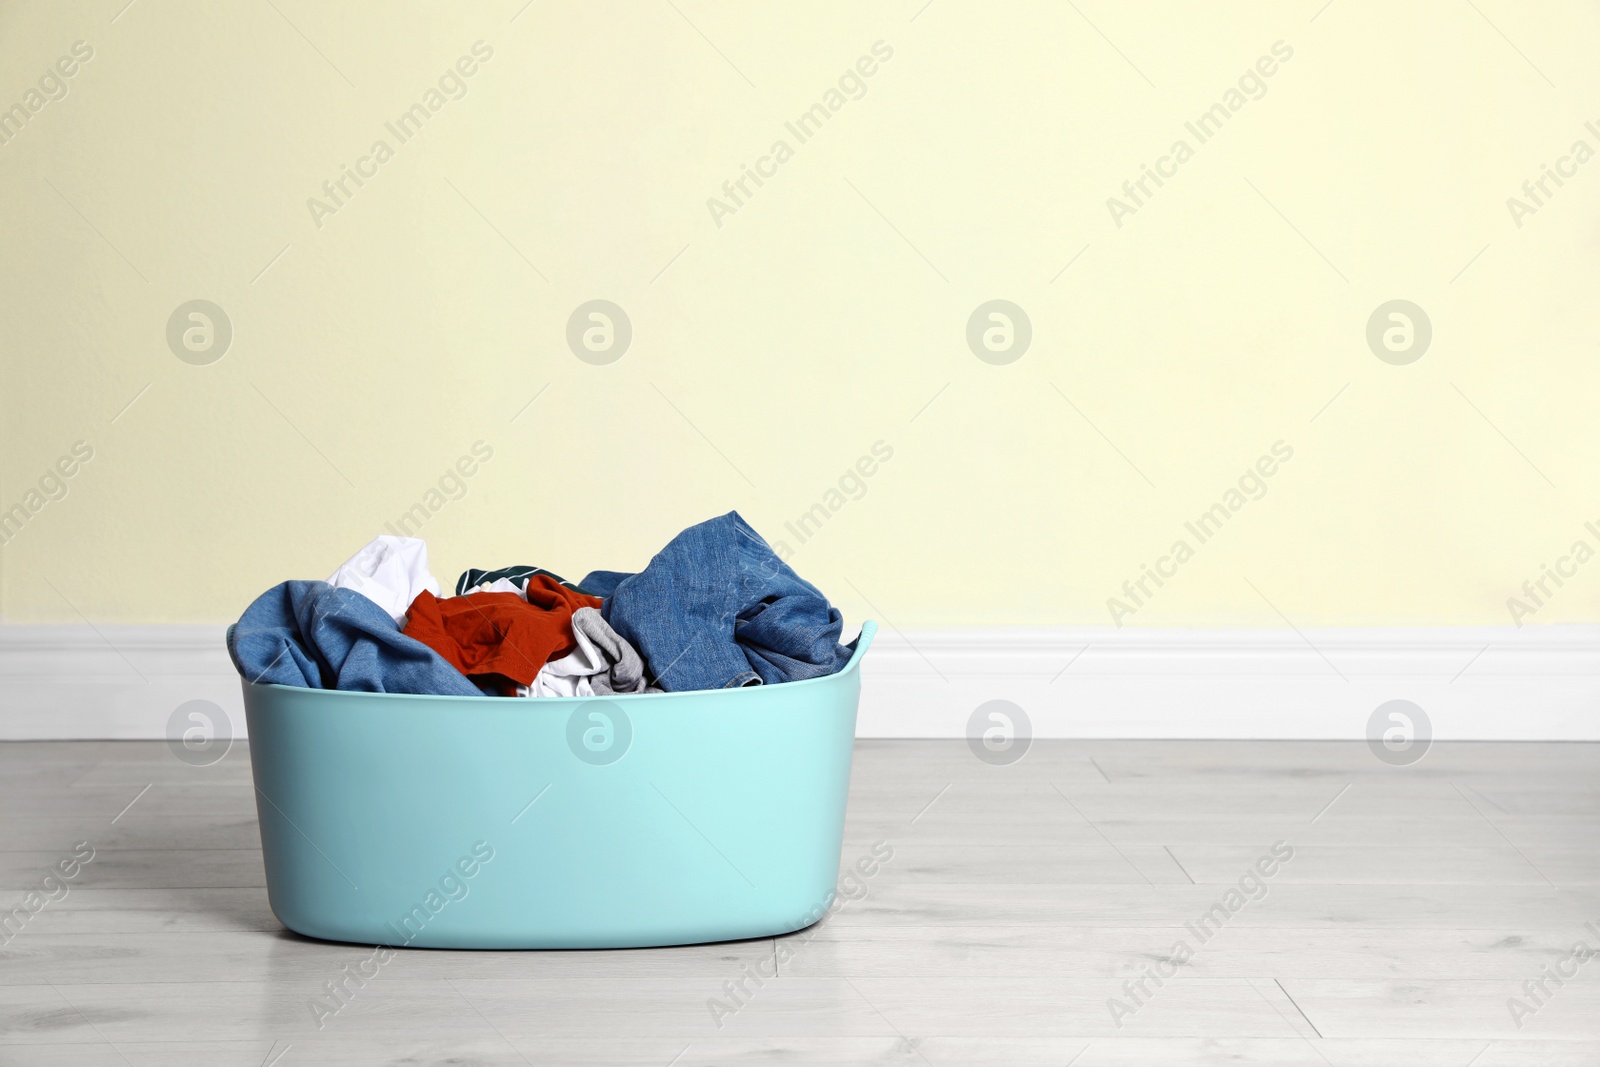 Photo of Plastic laundry basket full of dirty clothes on floor near color wall. Space for text